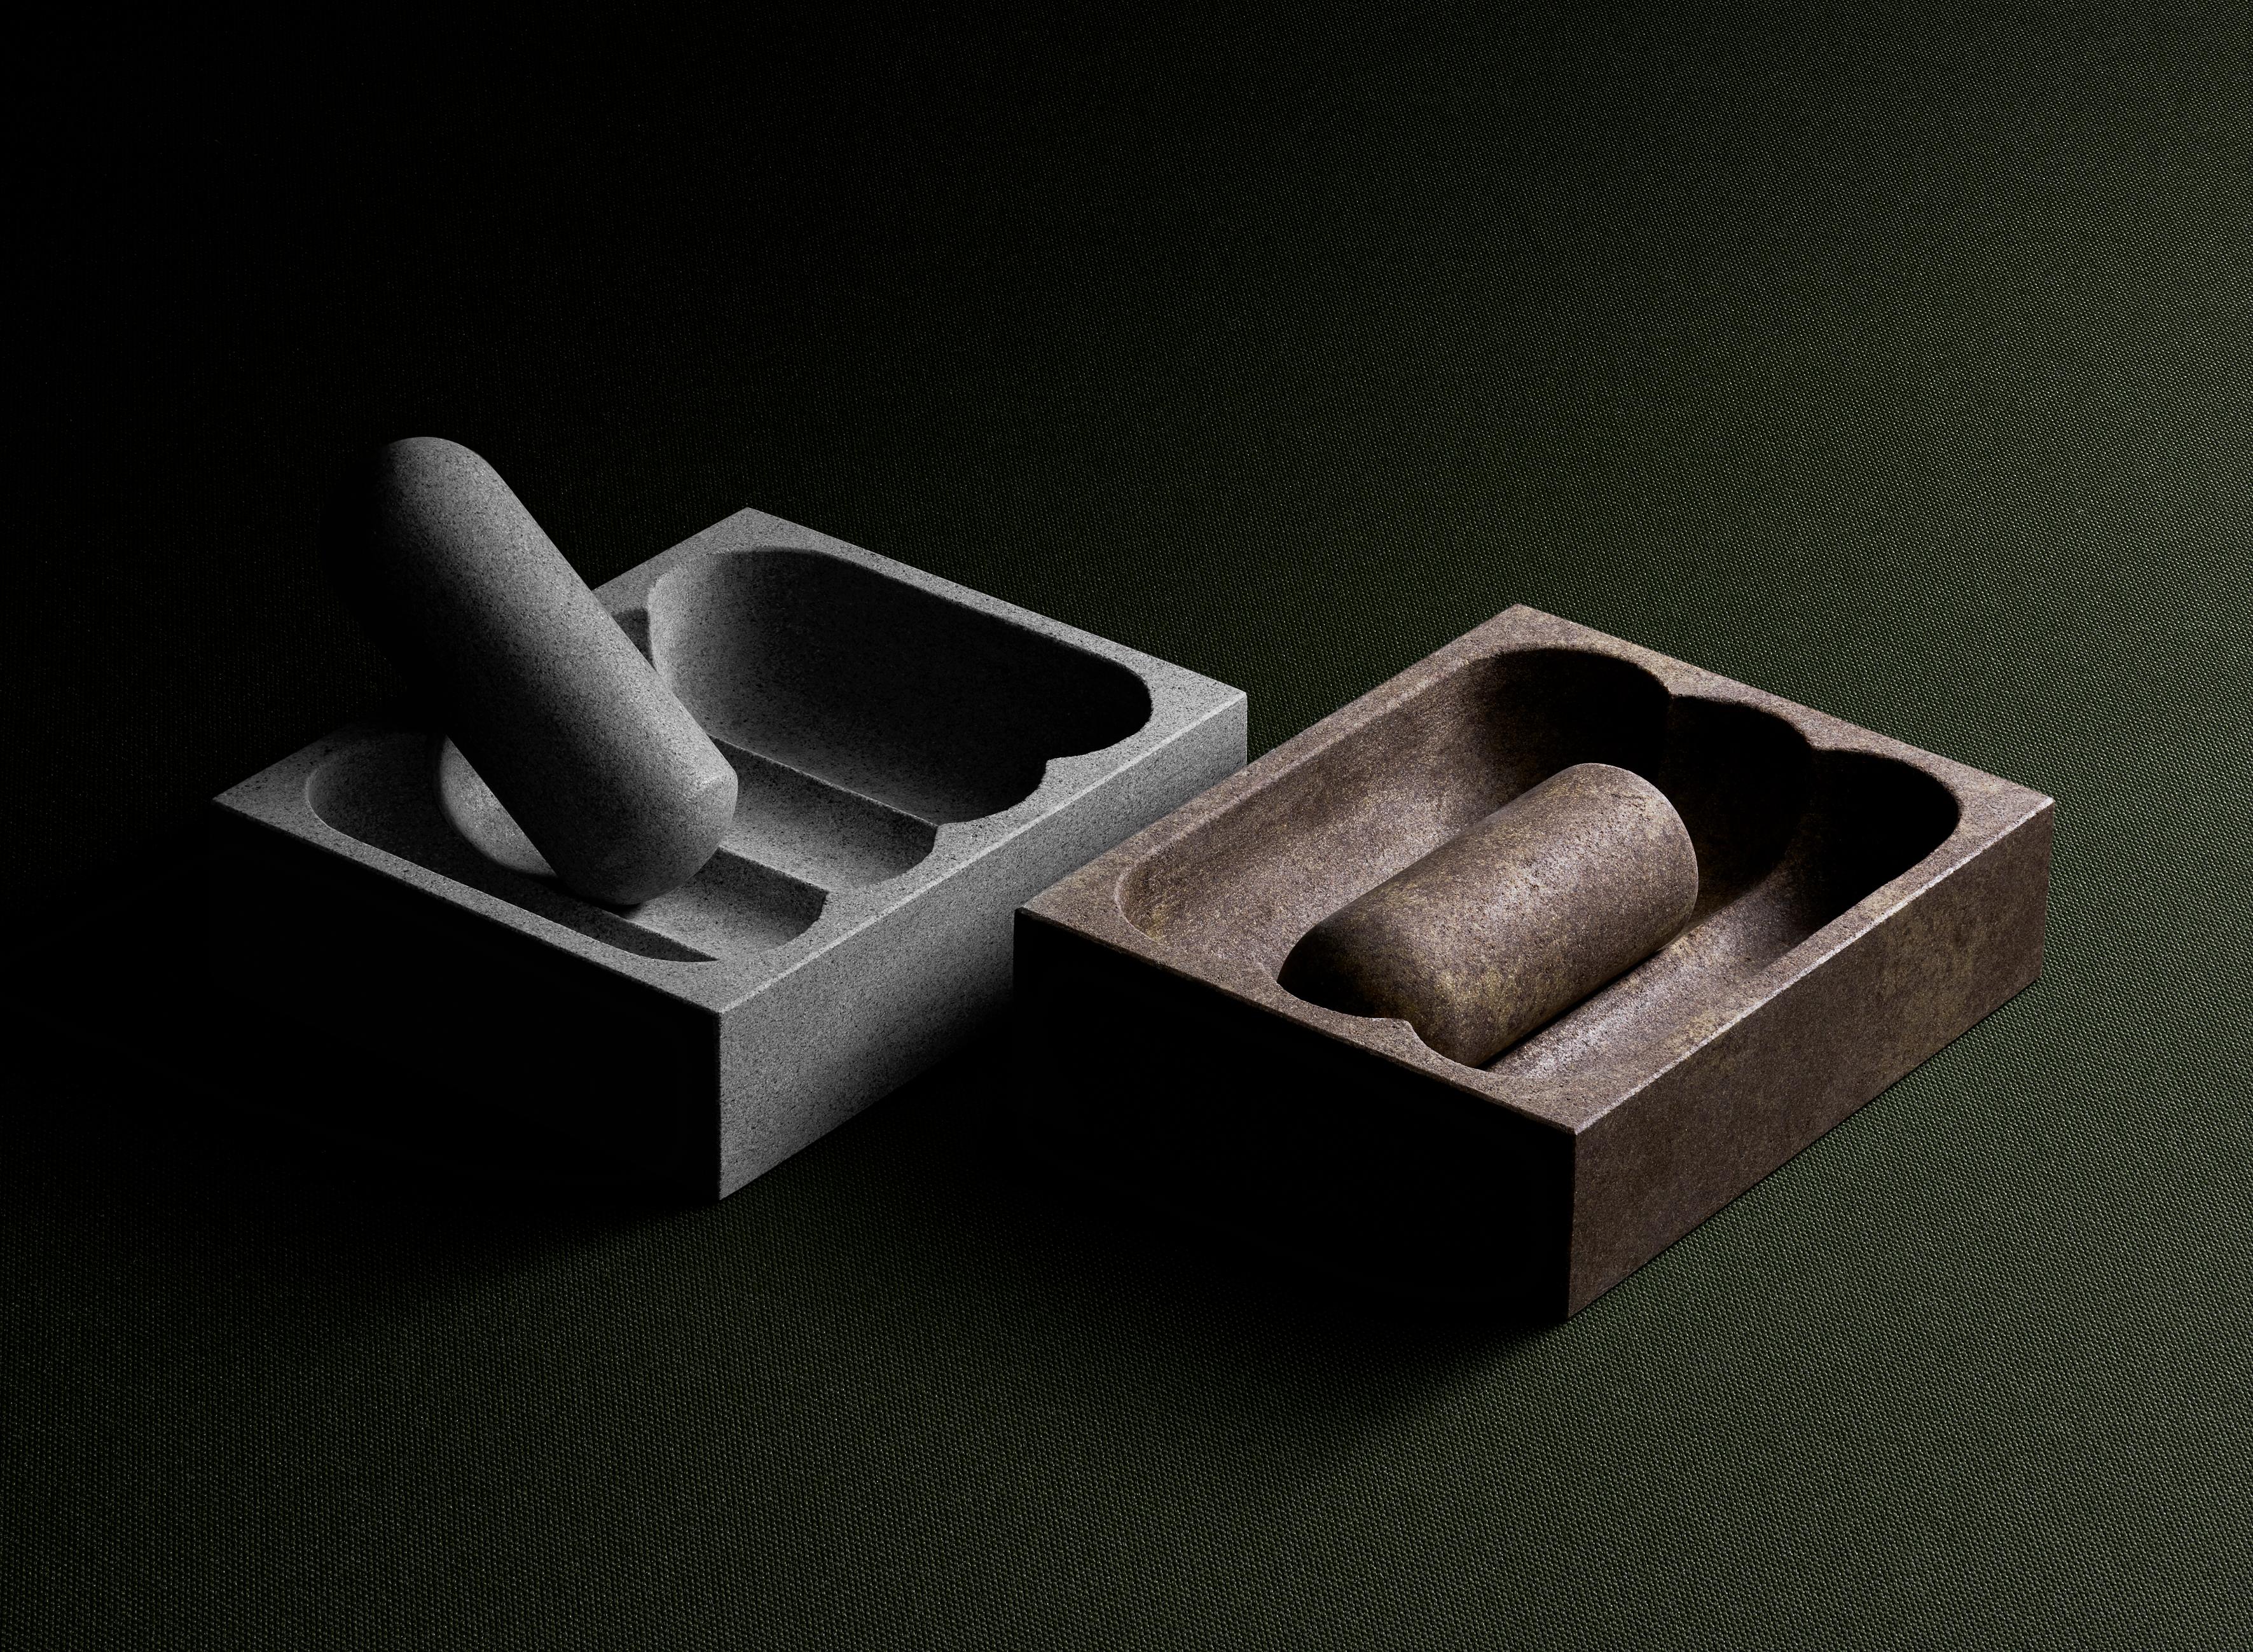 The Flute mortar and pestle set is manufactured by a north Italian stone specialist from Italian sandstone Rosso Etrusco and Pietra Serena. It can be used to crush pepper and other spices or simply as a salt tray.
It comes with three lengthwise